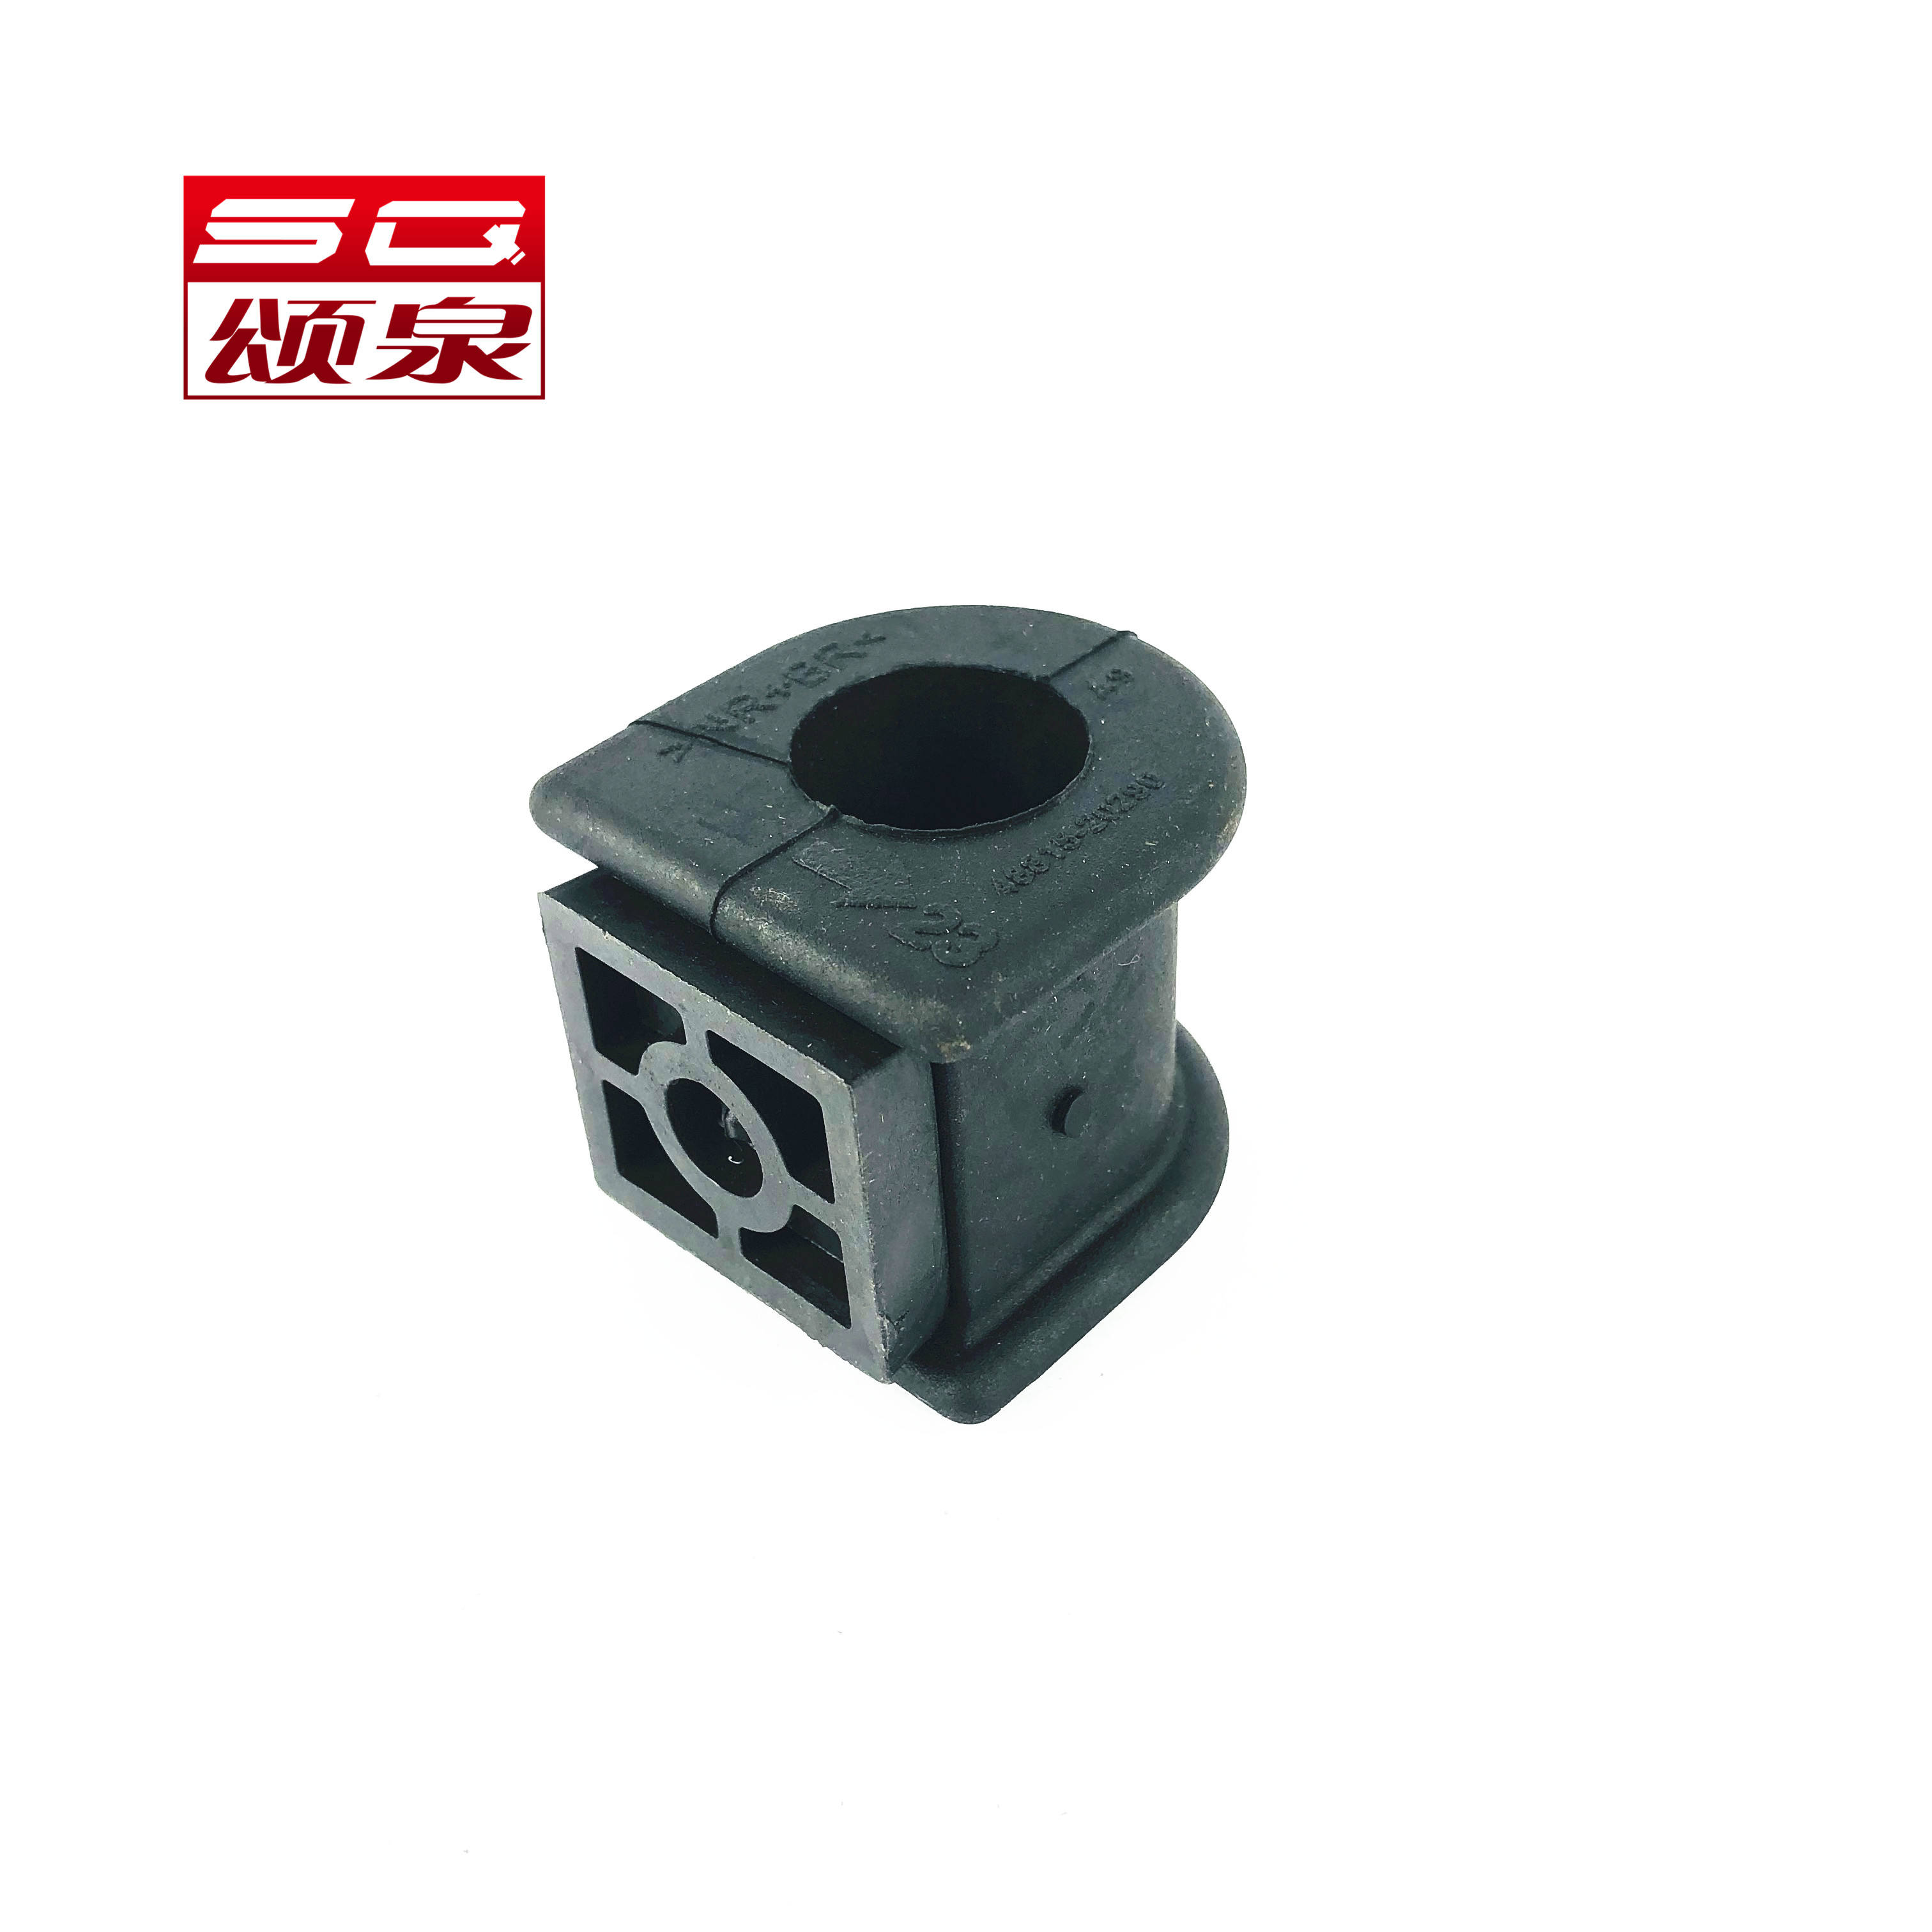 BUSHING FACTORY 48815-20290 Suspension Parts Stabilizer Bushing for TOYOTA High Quality Rubber Bushing